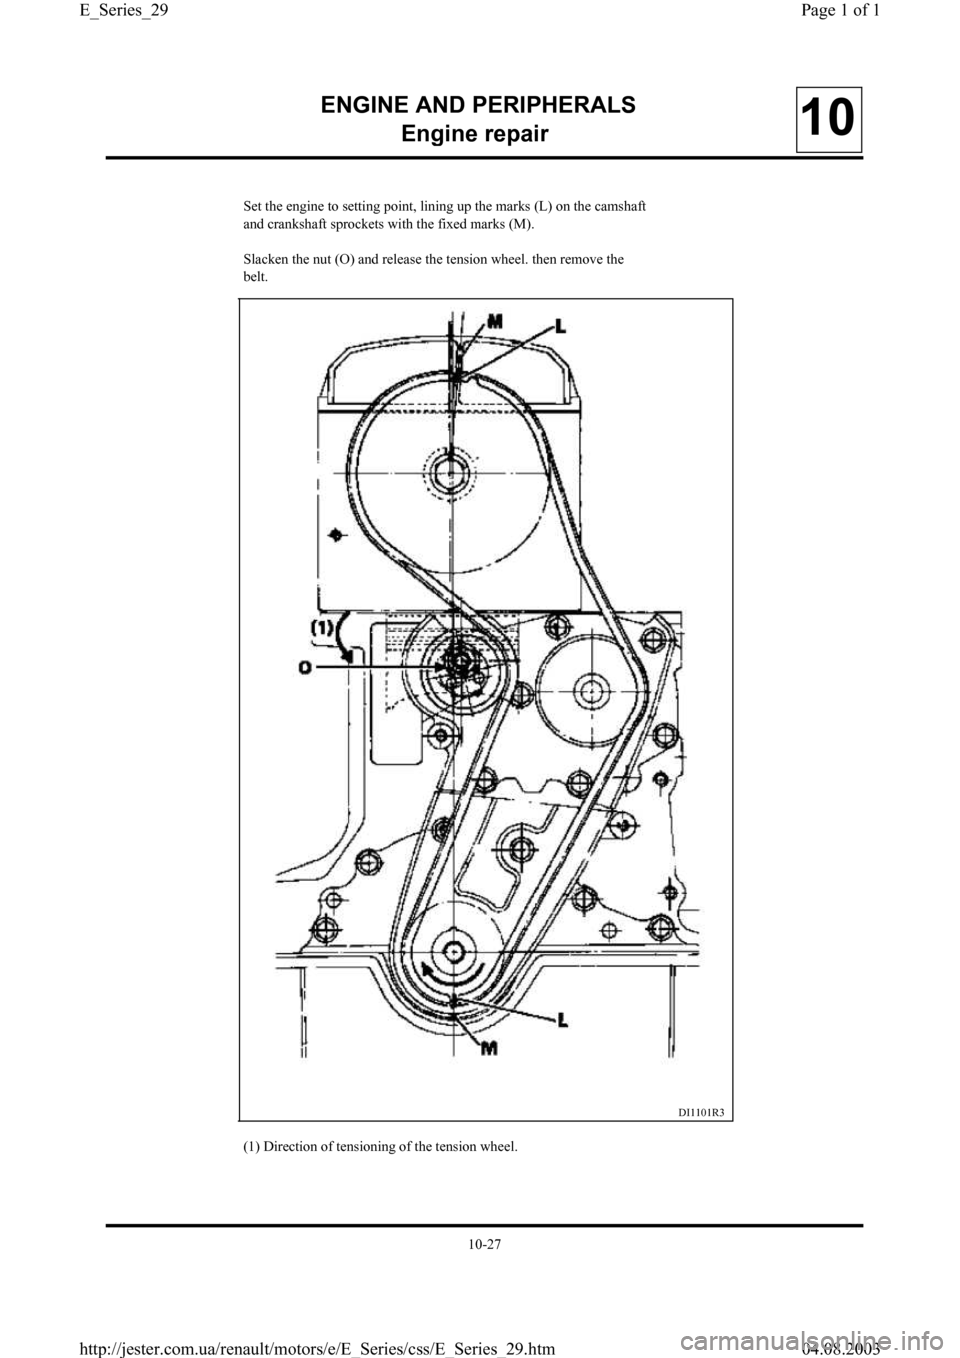 RENAULT CLIO 1997 X57 / 1.G Petrol Engines Owners Manual ENGINE AND PERIPHERALS
En
gine repair10
DI1101R3
(1) Direction of tensioning of the tension wheel. Set the en
gine to setting point, lining up the marks (L) on the camshaft
and crankshaft sprockets wi